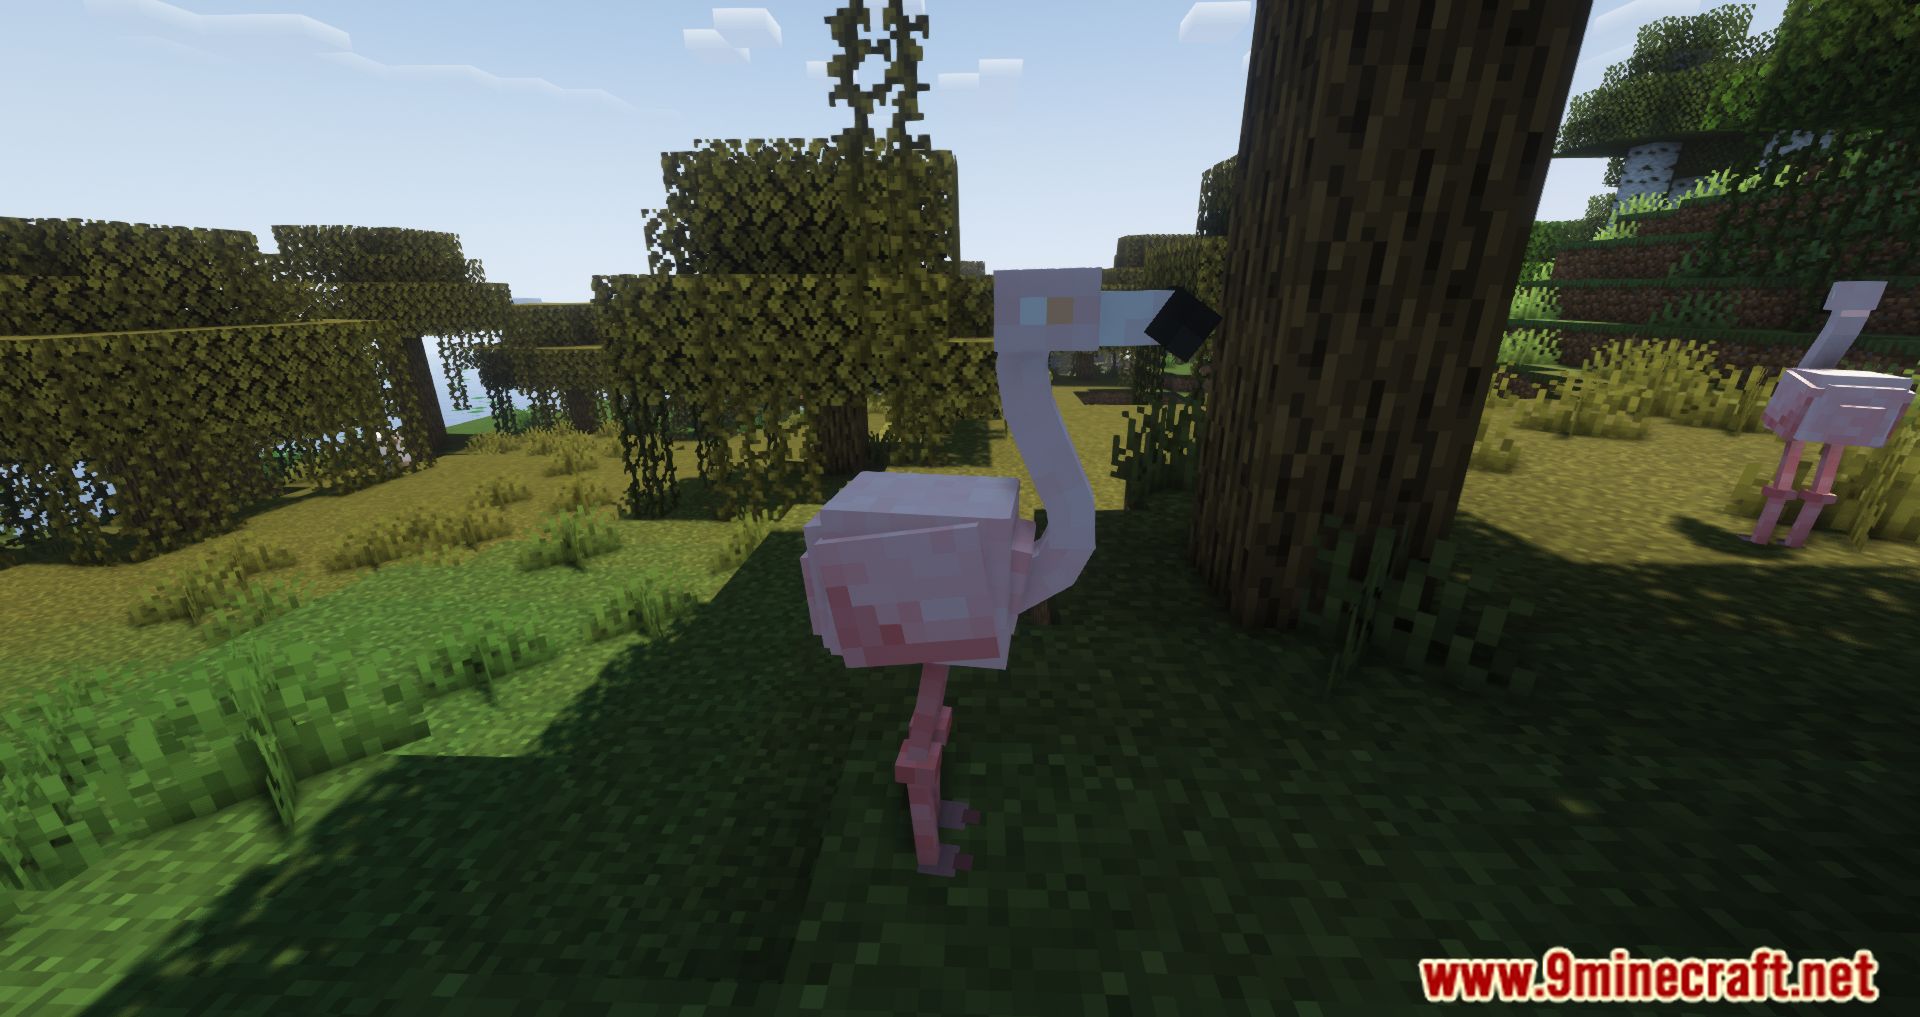 Flamingo, oh, oh, oh Mod (1.16.5, 1.15.2) - Lovely Creature With Pink Color 5